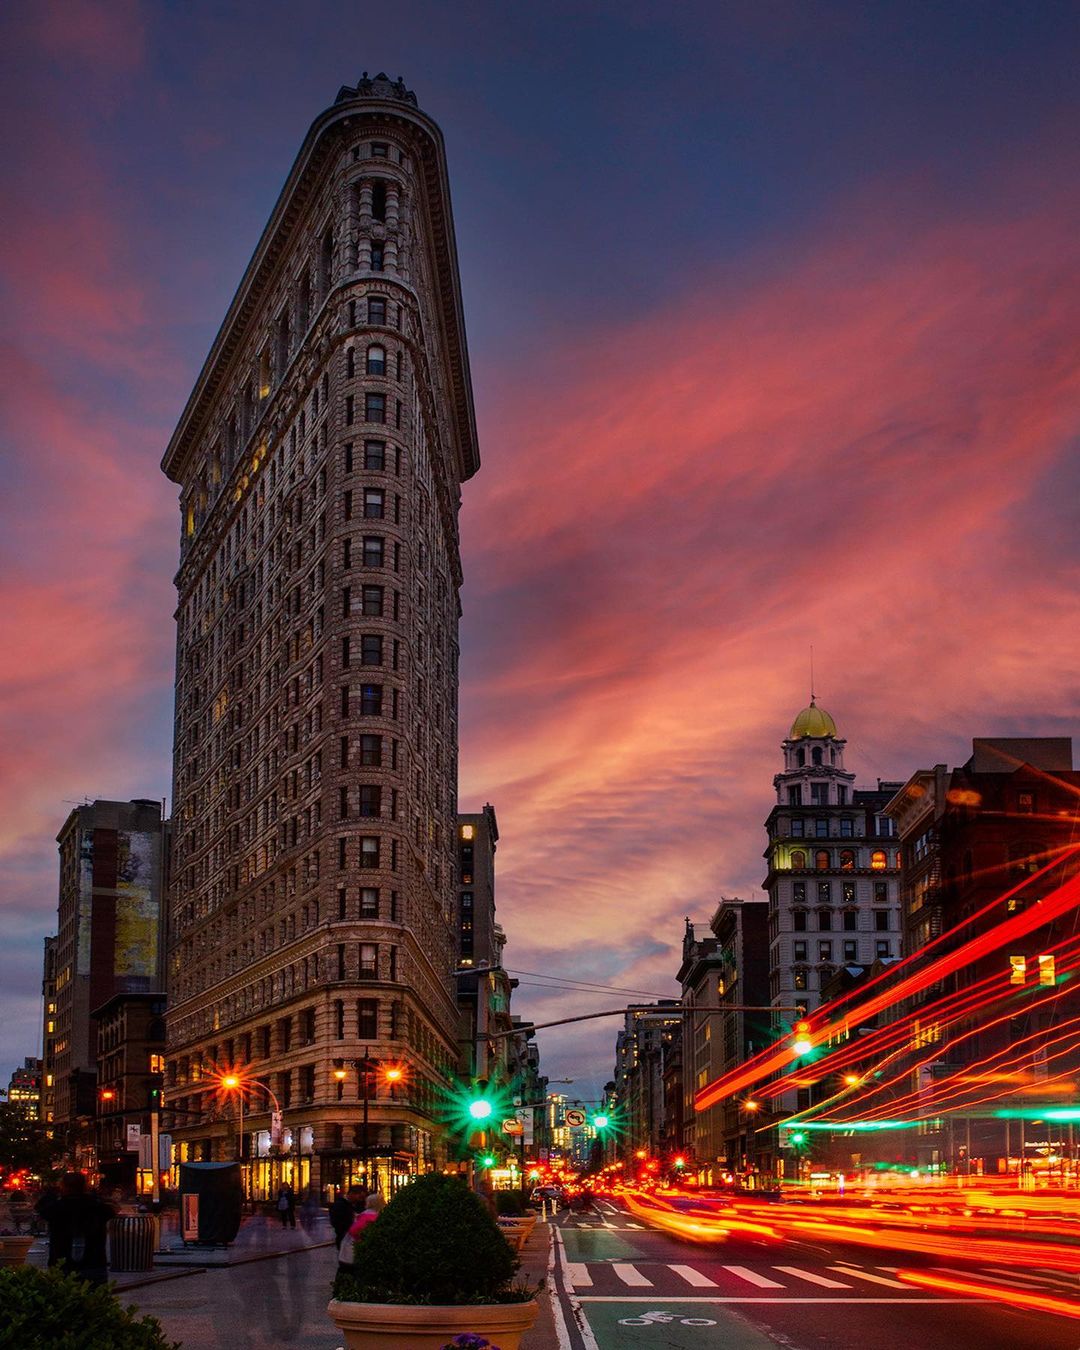 The Flatiron Building in NYC with cotton candy skies in the background